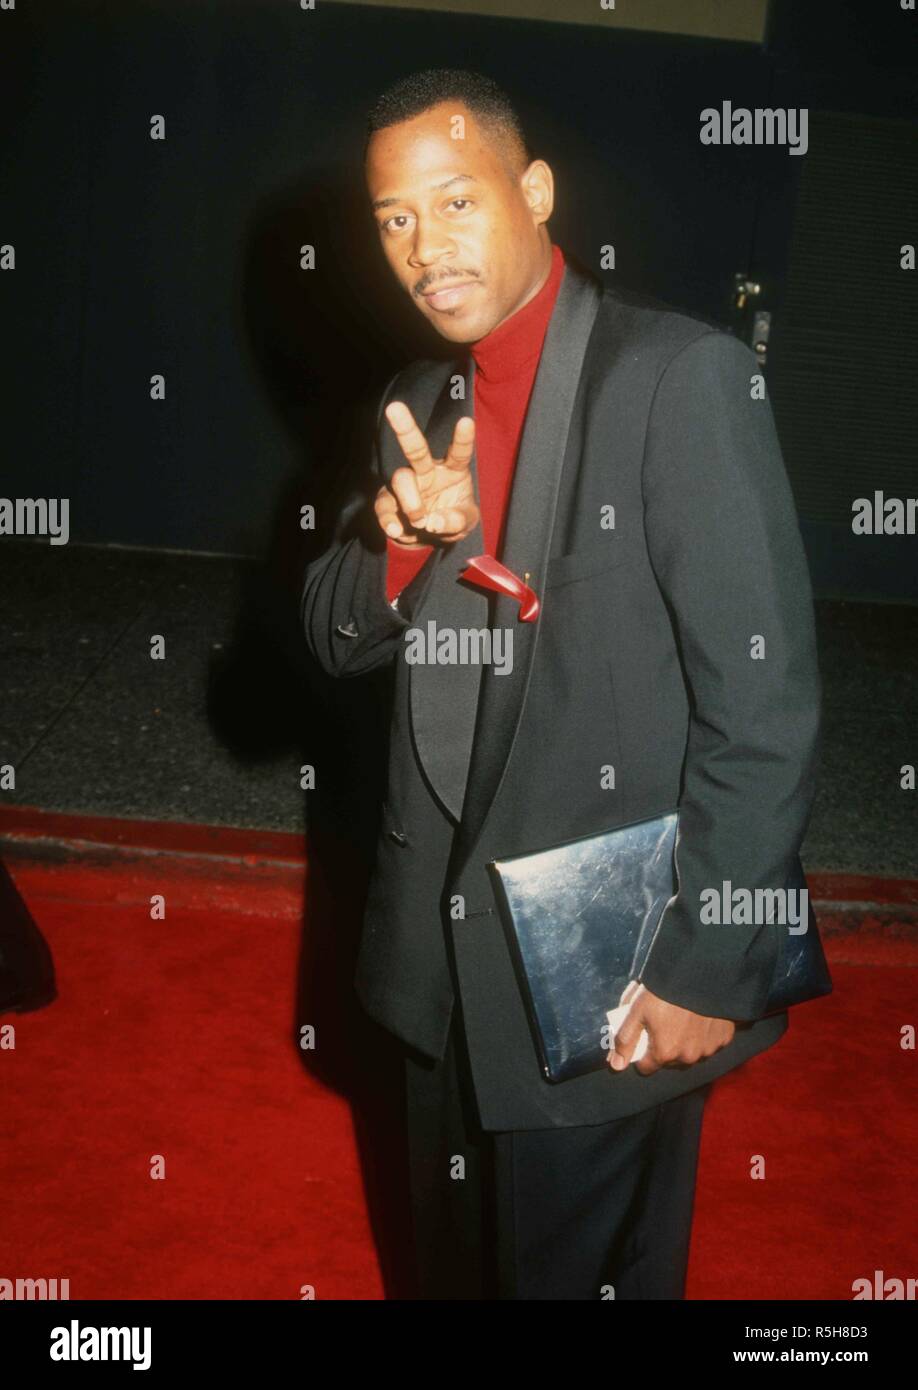 UNIVERSAL CITY, CA - MARCH 9: Comedian Martin Lawrence attends the 19th Annual People's Choice Awards on March 9, 1993 at Unversal Studios in Universal City, California. Photo by Barry King/Alamy Stock Photo Stock Photo